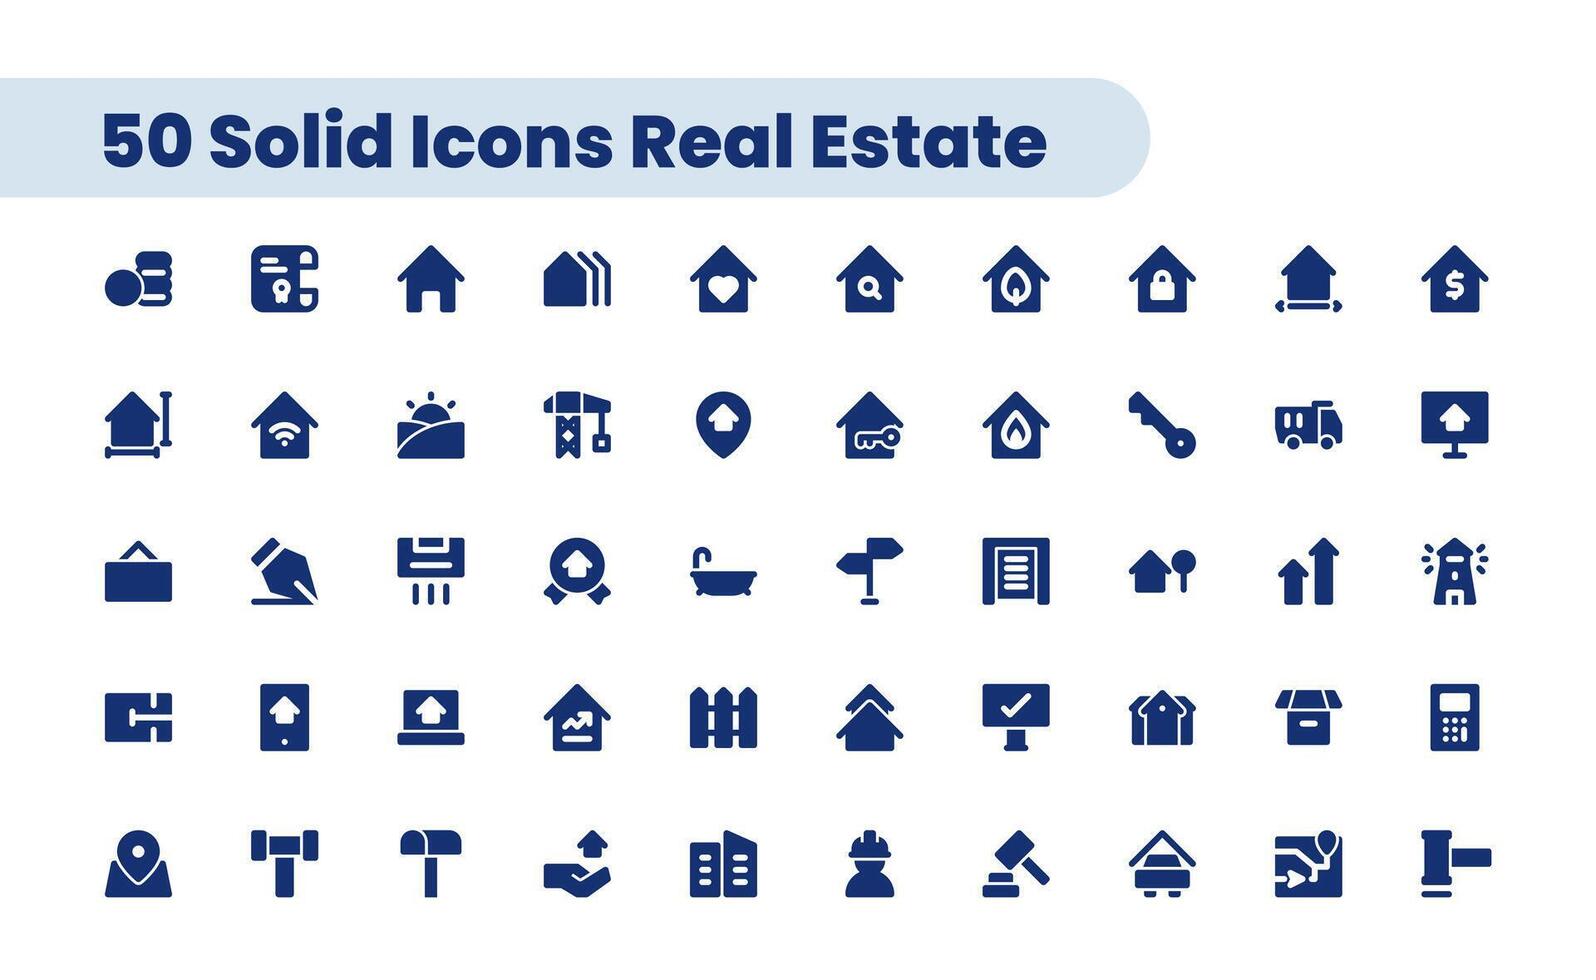 Solid web icons set - Real Estate vector